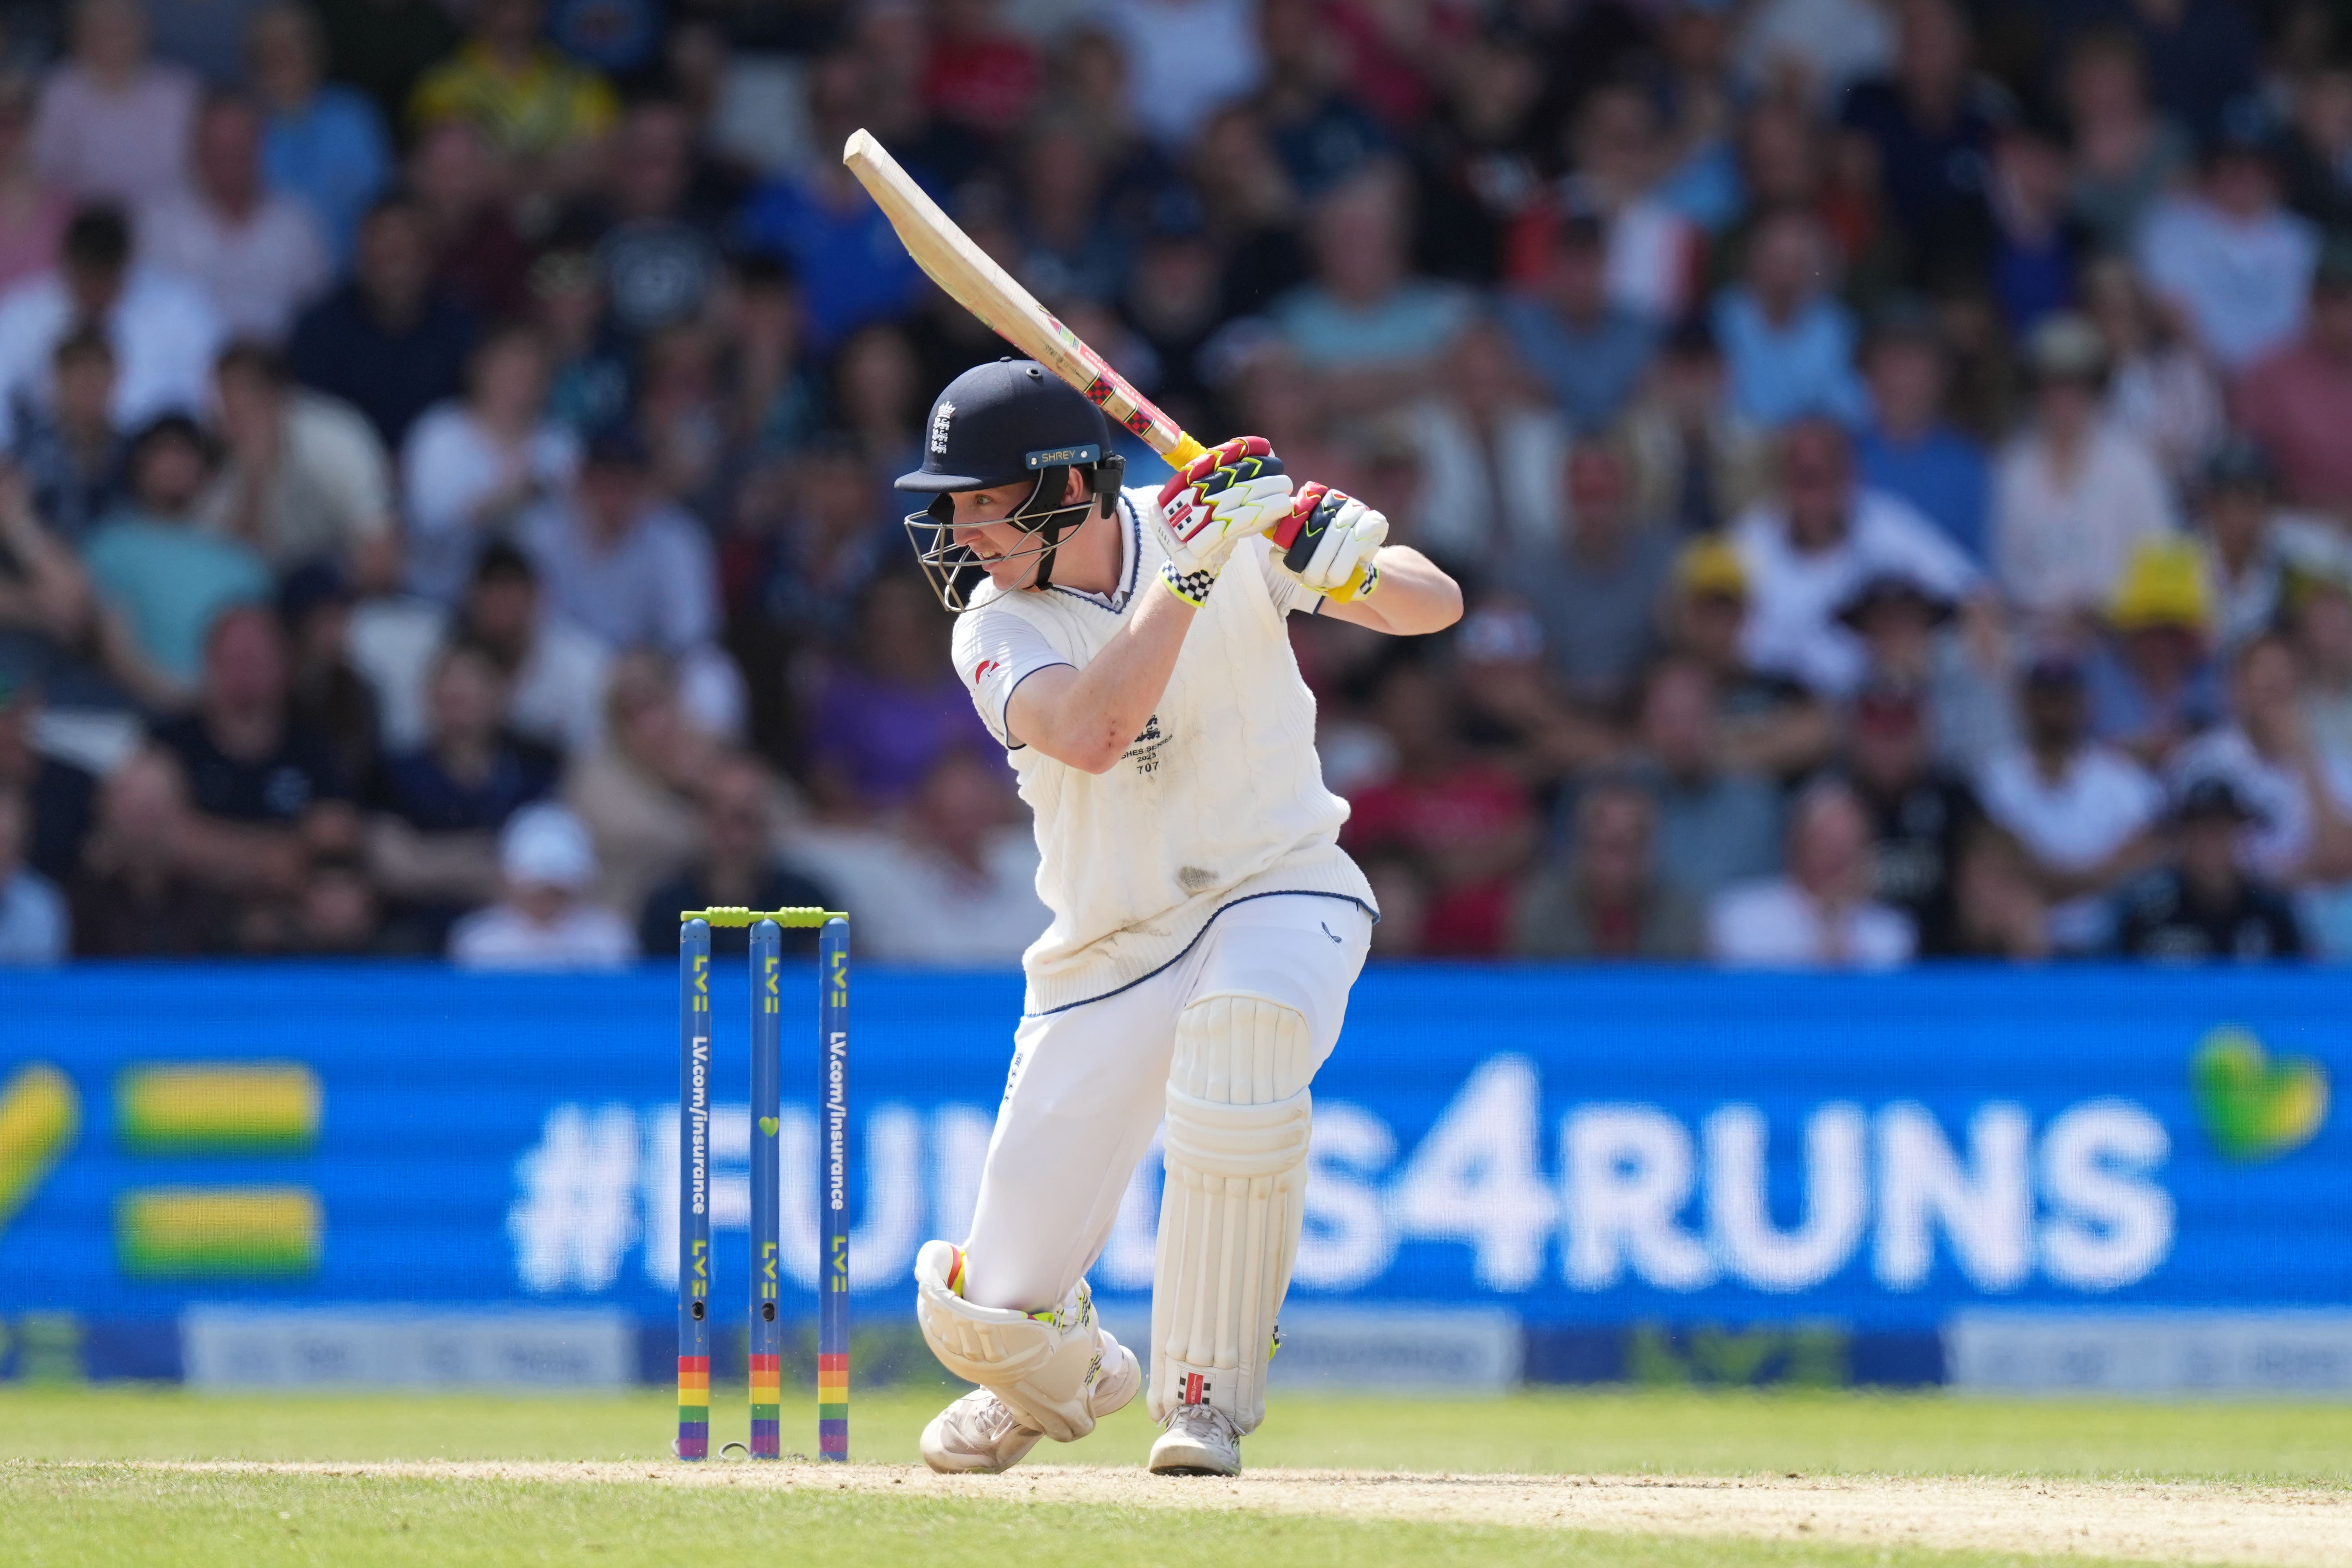 England’s Harry Brook in batting action during day four of the third Test (Danny Lawson/PA)